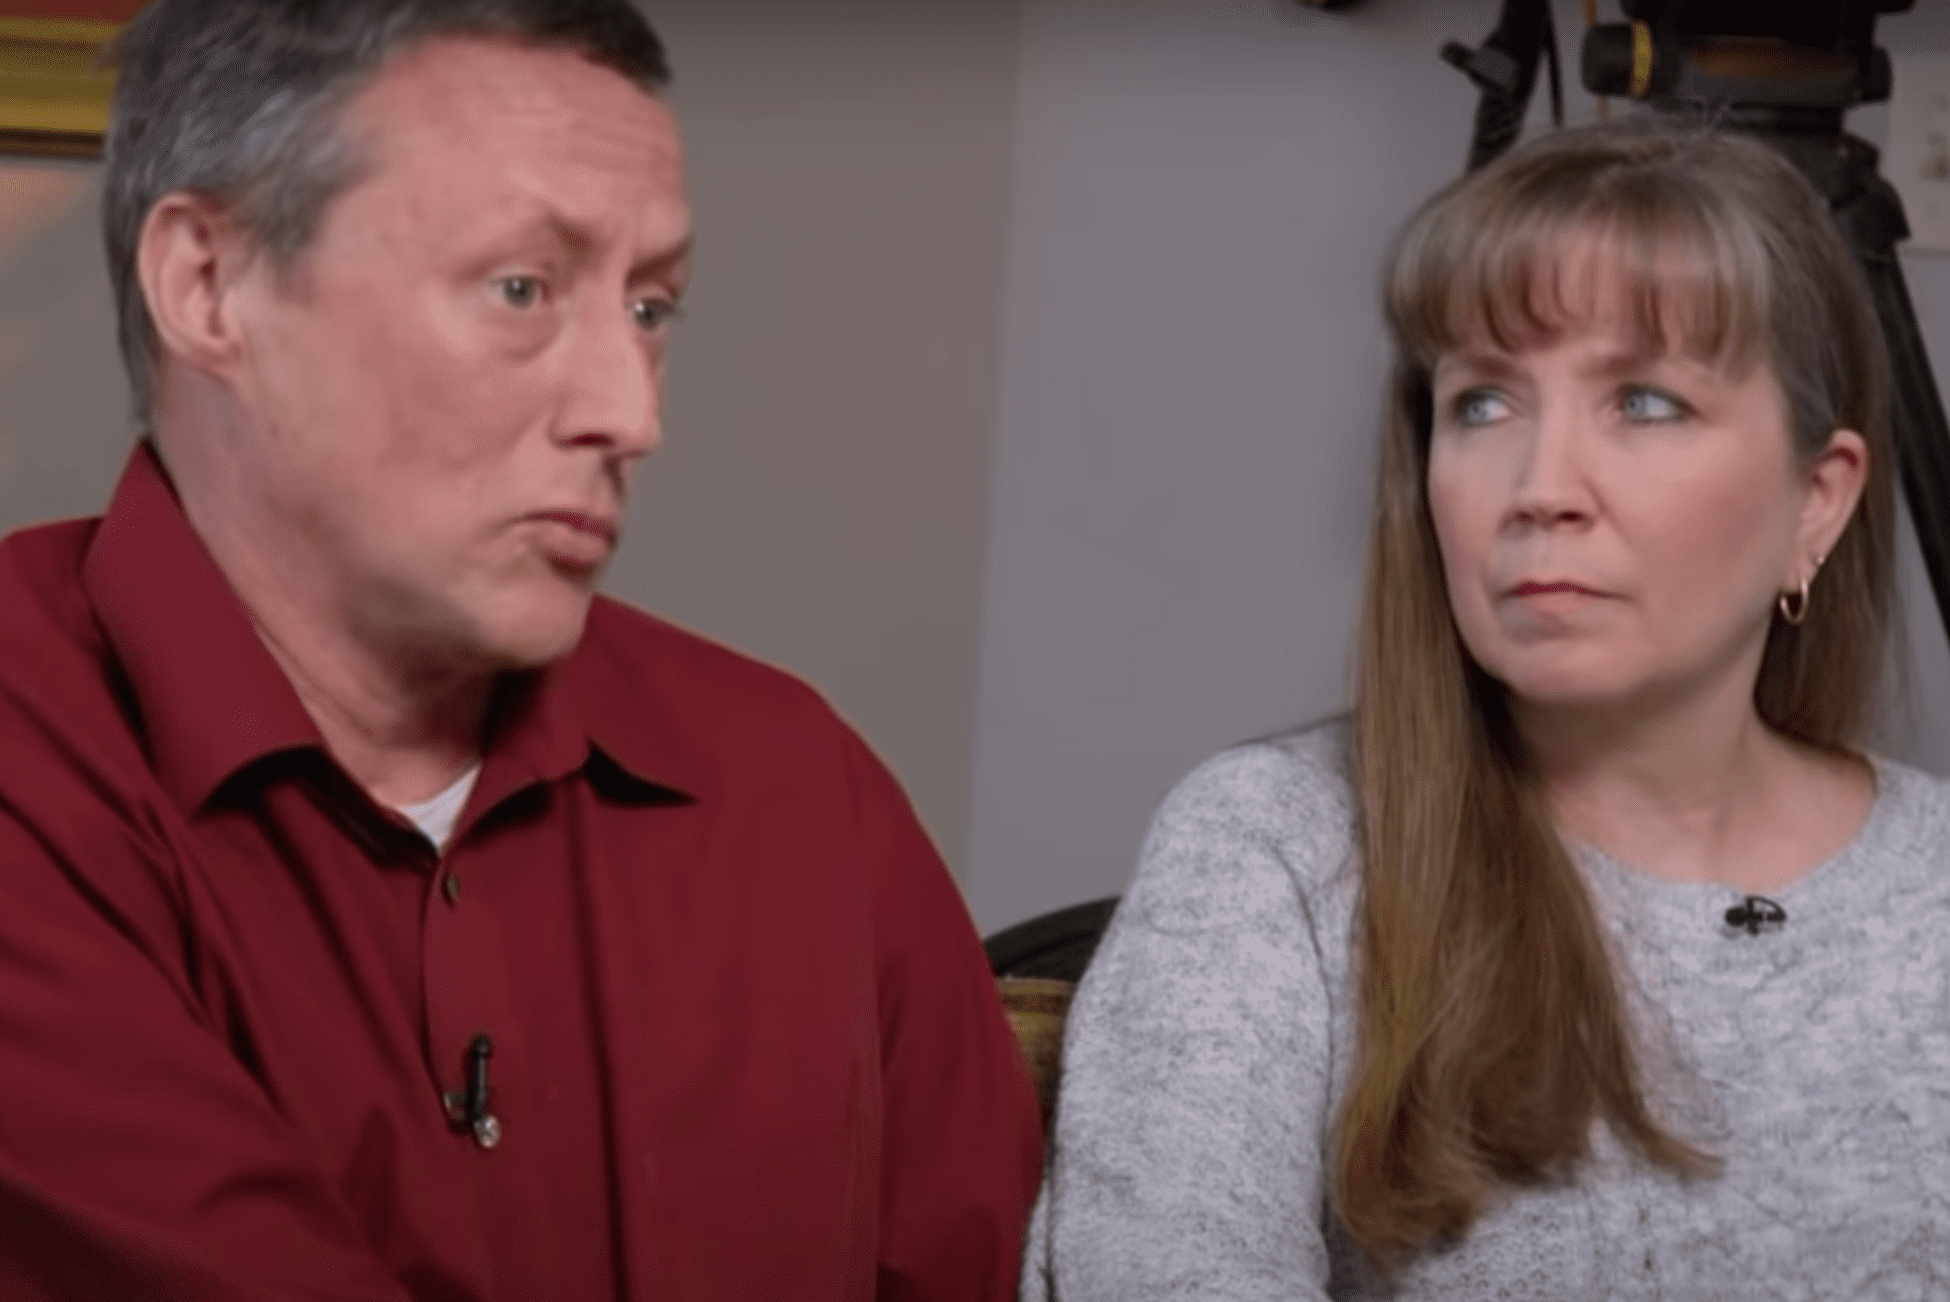 The Dalsing parents were devastated because of the custody battle. | Source: youtube.com/ABC News